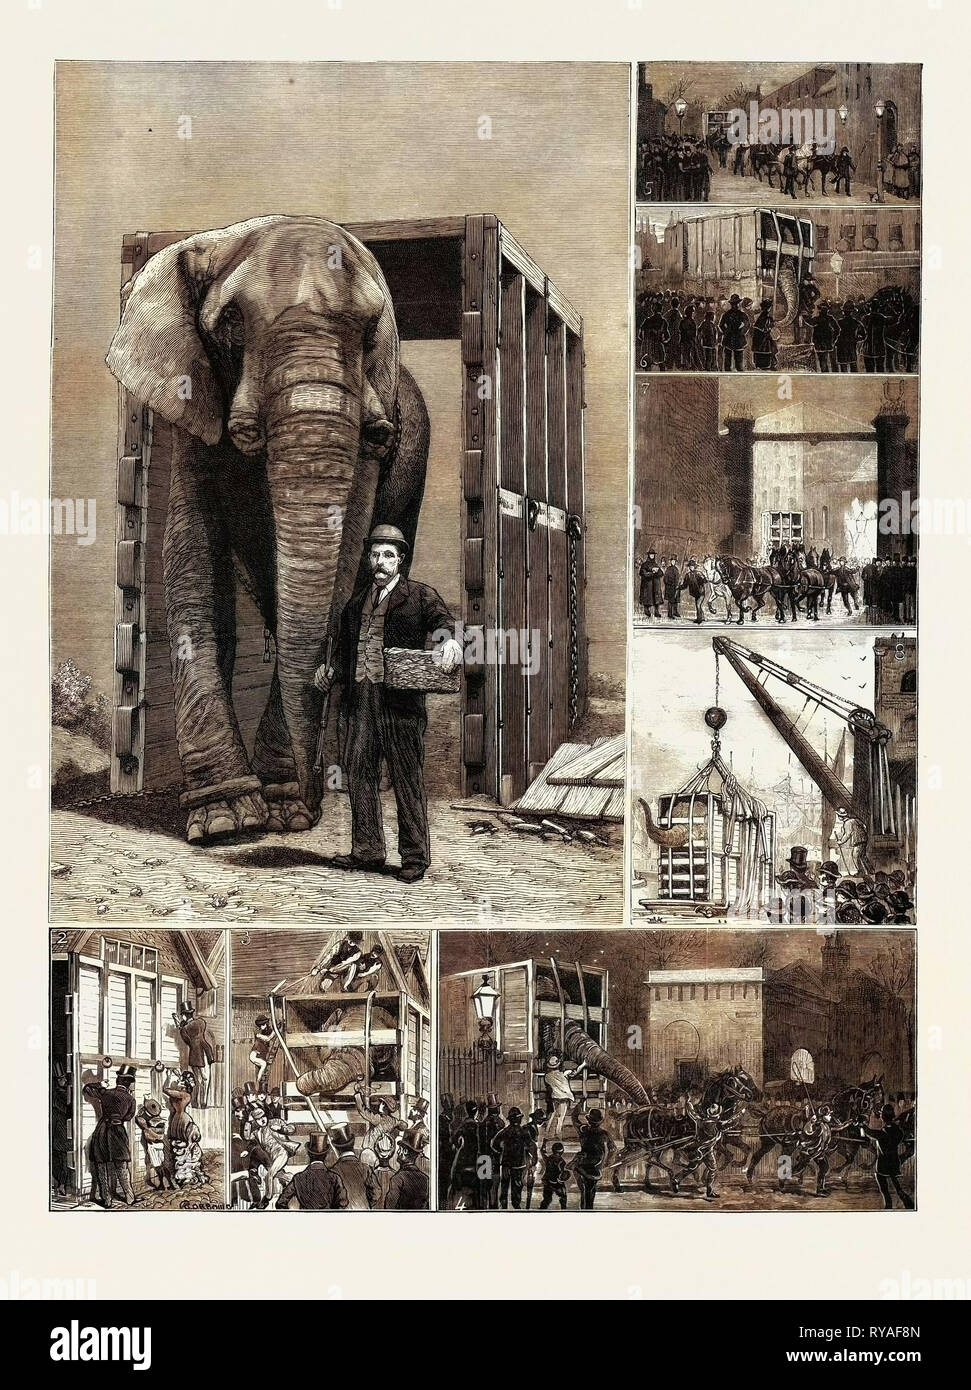 The Removal of Jumbo, on the Way to the Docks: 1. Through His Box at Last, 2. Visitors Inscribing Names on the Box As Having Called, 3. Jumbo Objects to the Irons, 4. At the Park Gates: Jumbo Drives Himself, 5. Albany Street: 'Guard Turn Out', 6. En Route, 'Jumbo's Old Lady', 7. Entering St. Katherine's Dock, 8. In Mid-Air: Being Lowered Into the Barge Stock Photo